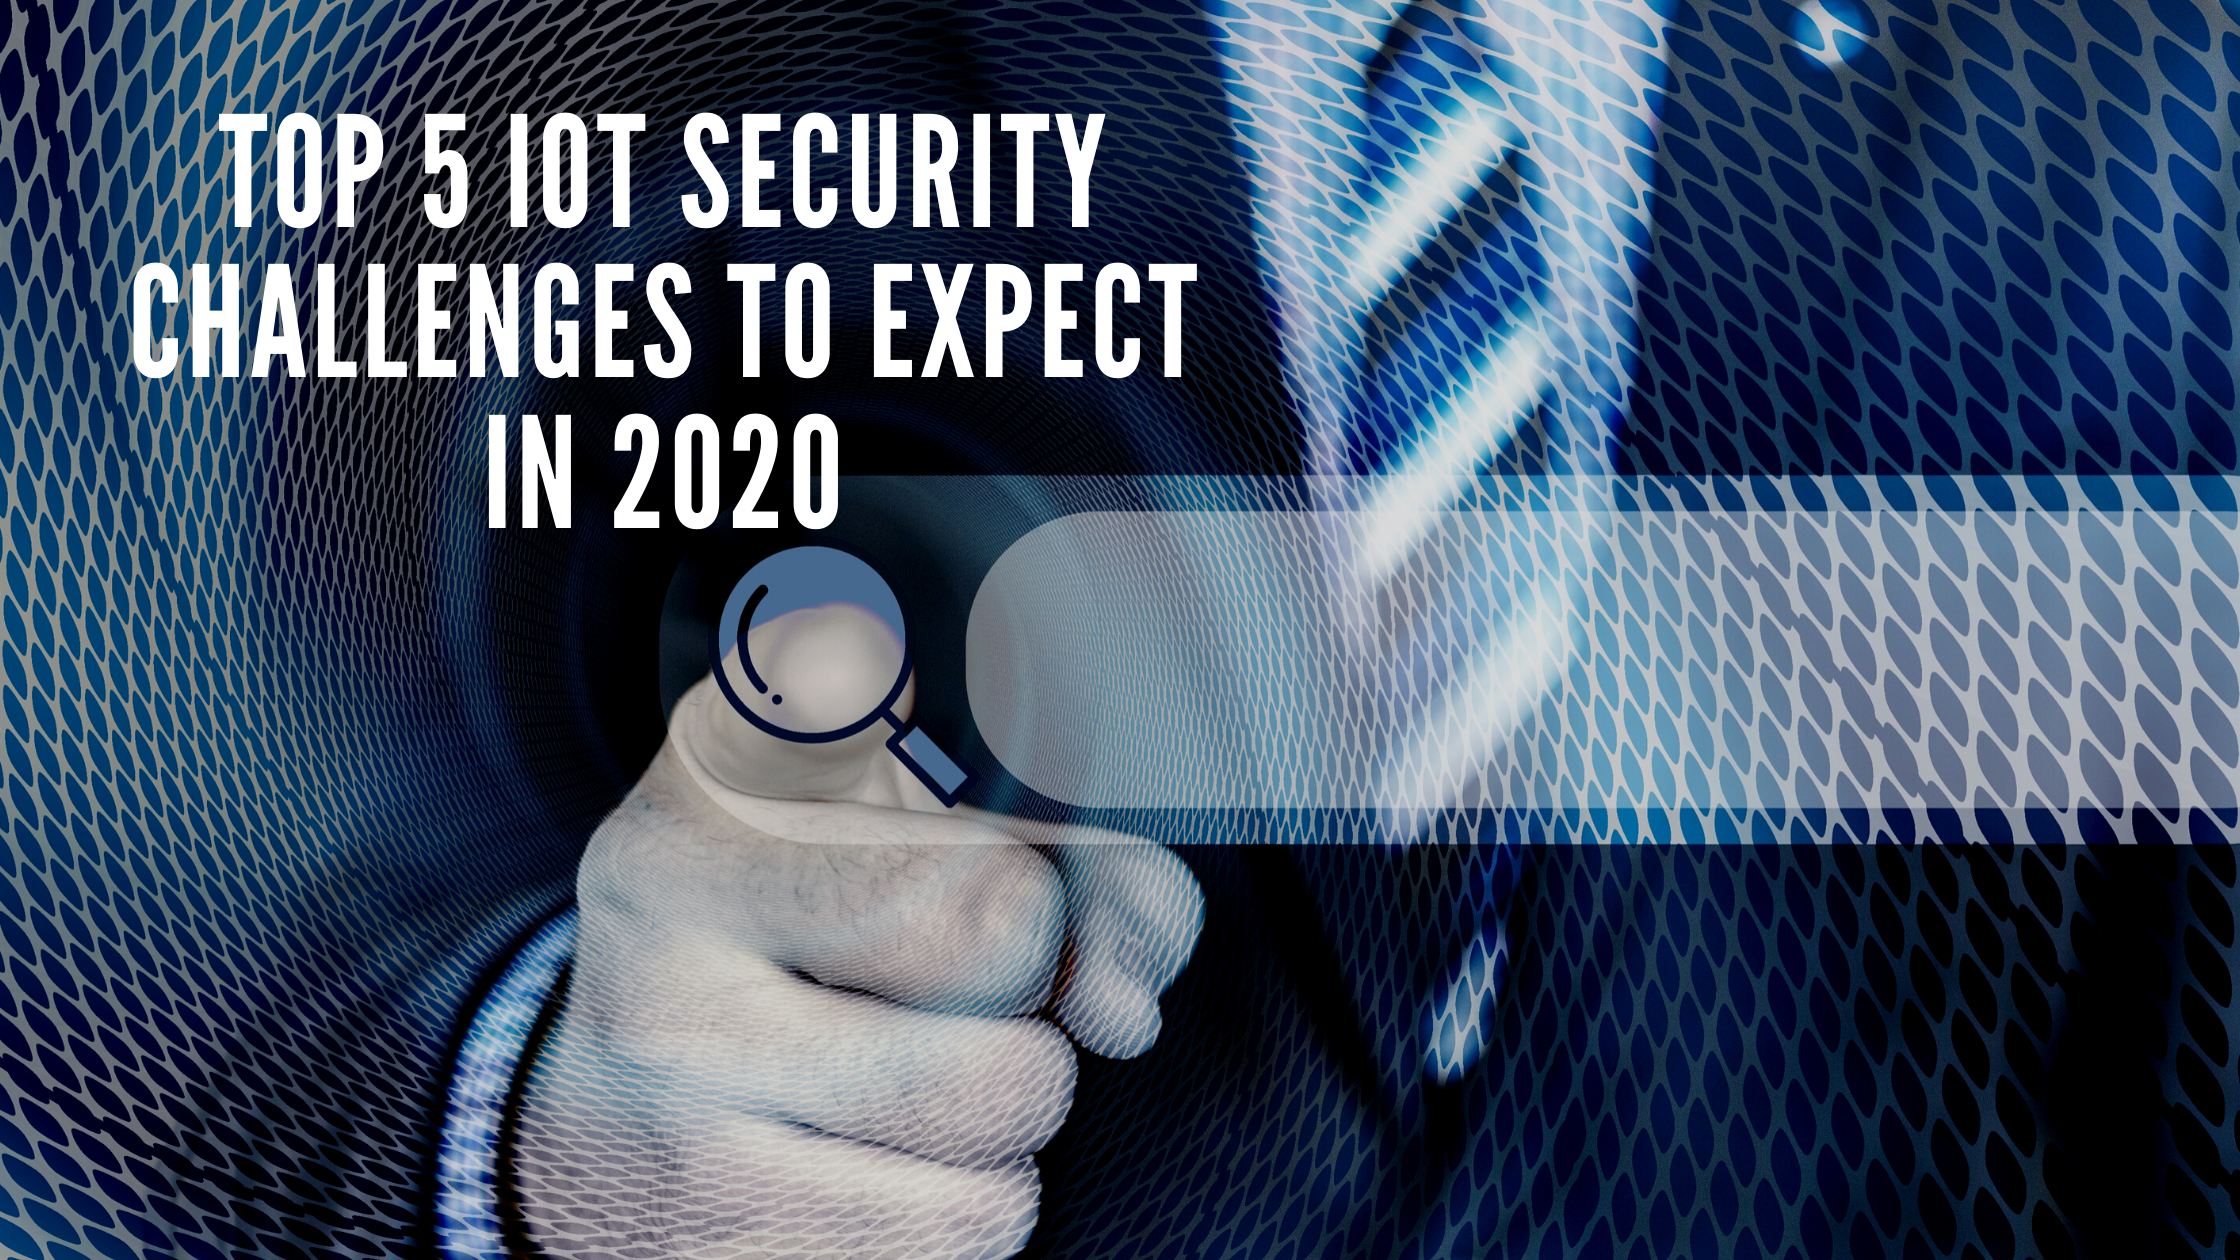 Top 5 IoT Security Challenges to Expect in 2020